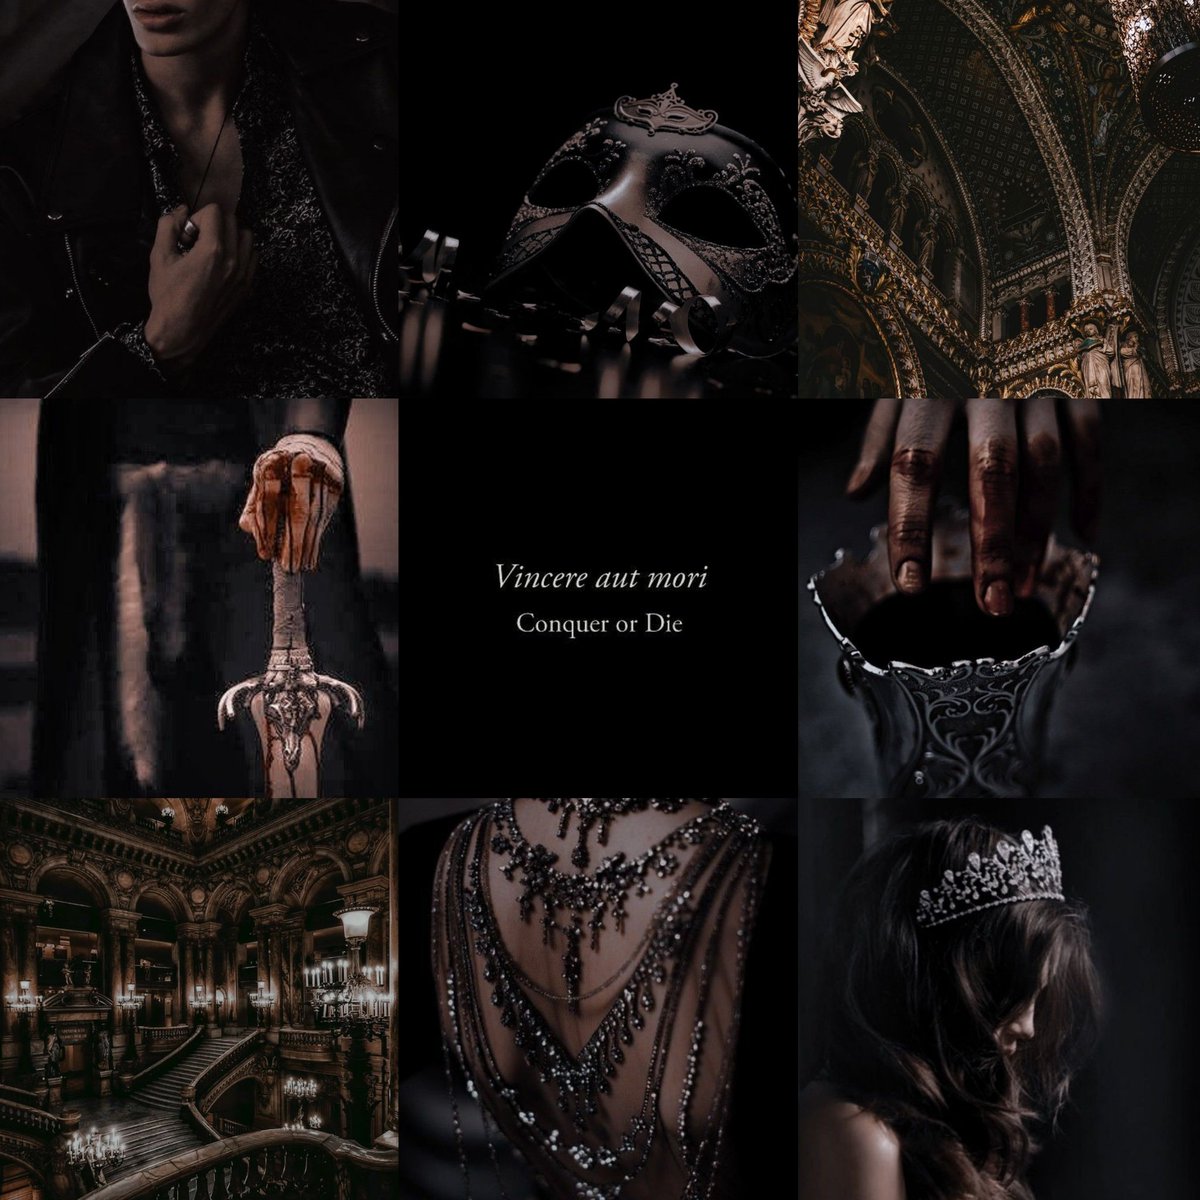 THE PRINCESS TRIALS X RED QUEEN

When the queen gets ill, Islwyn & Calista are her sole heirs, but they're bastards. To rule, they must beat five others & prove they can govern & that they can keep the thing killing the queen contained.

🗡 Poison Magic
🗡 Sentient Darkness